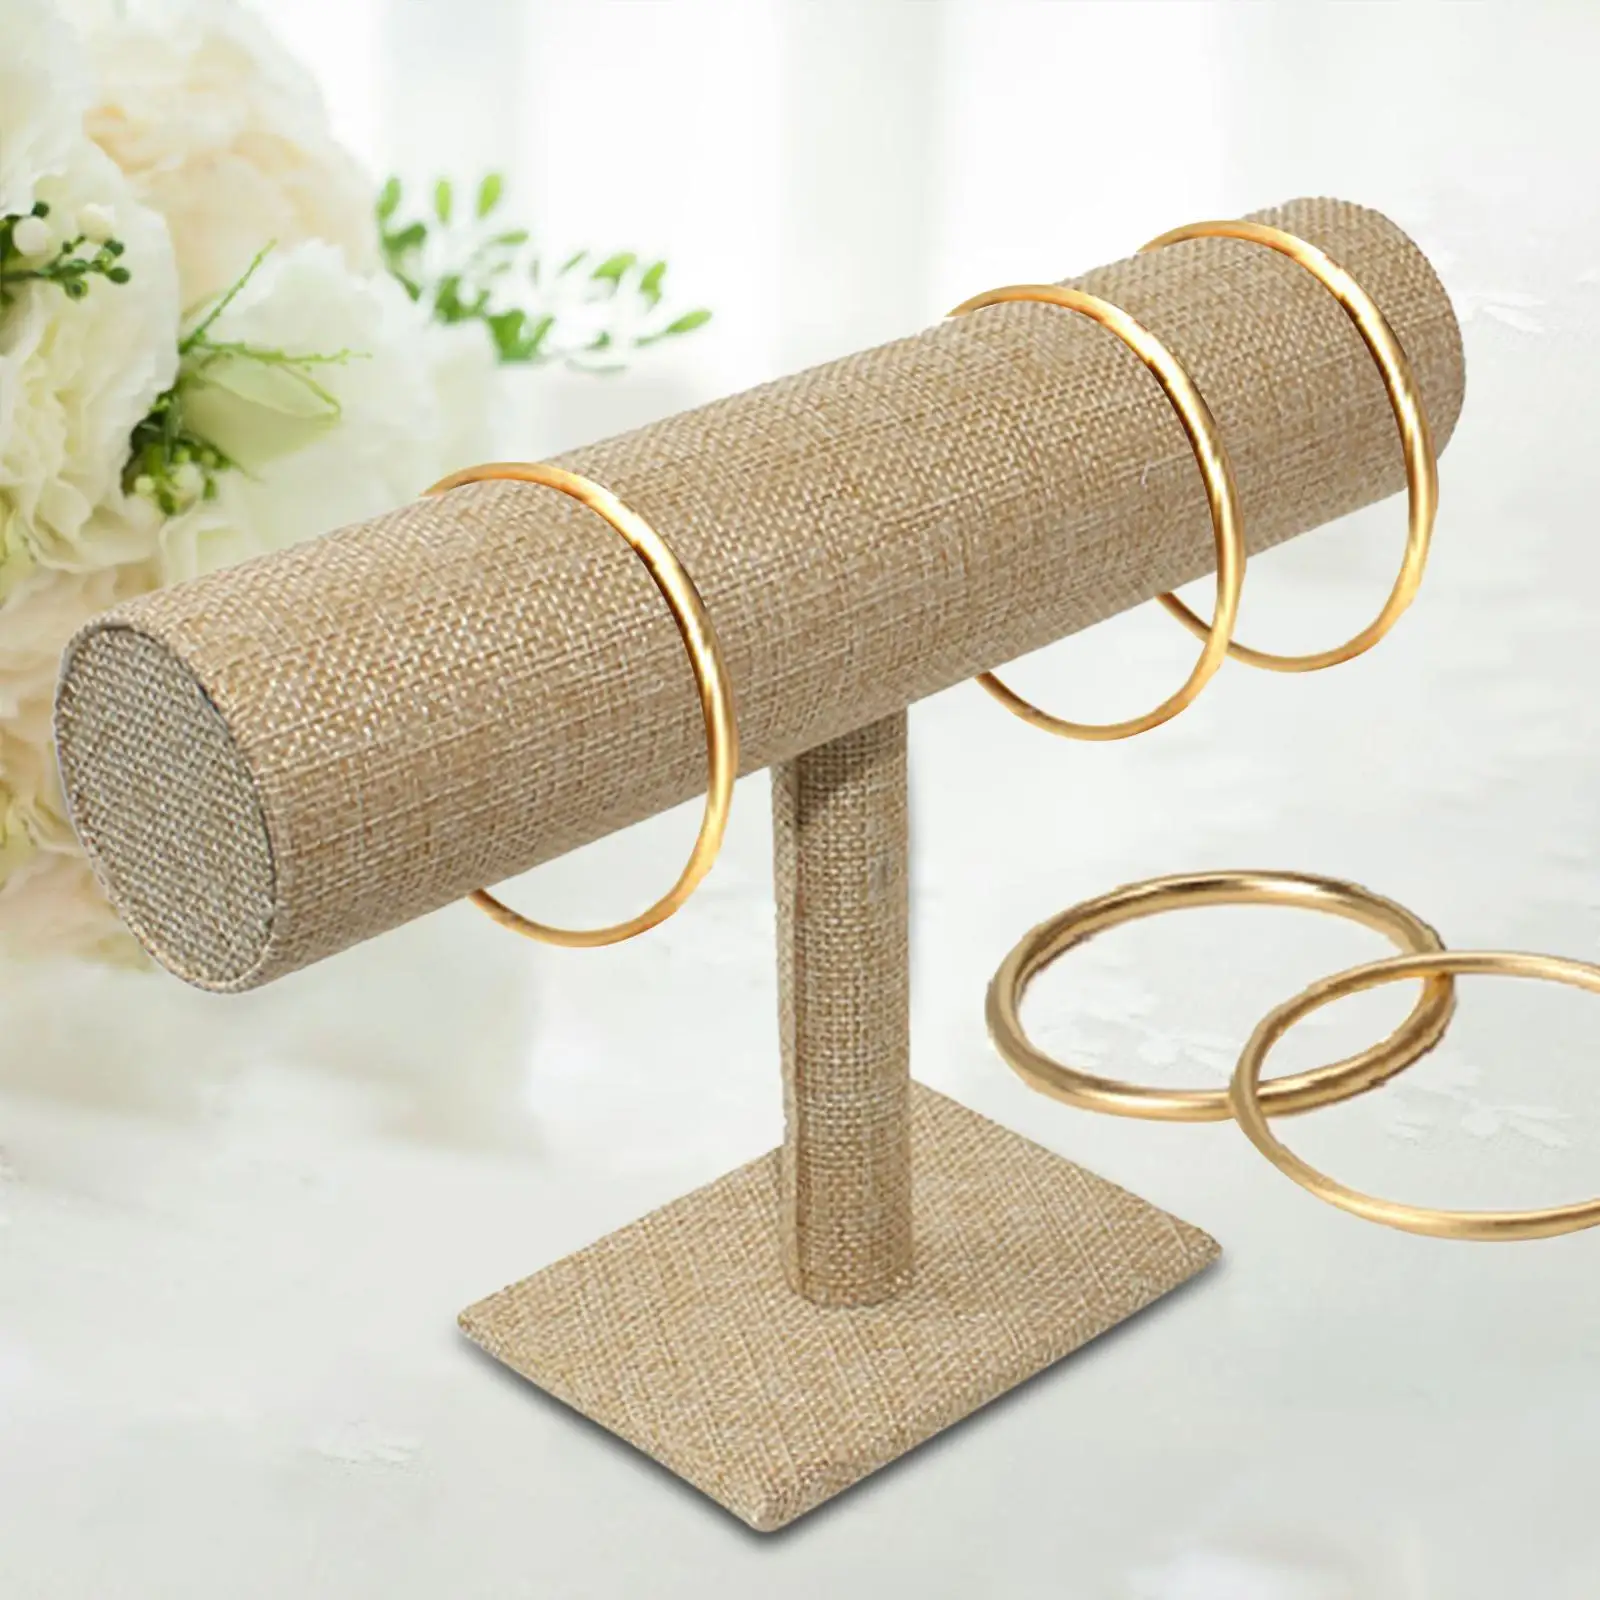 Jewelry Organizer Stand for Home Storage and Organization - Keep your accessories organized with this elegant stand